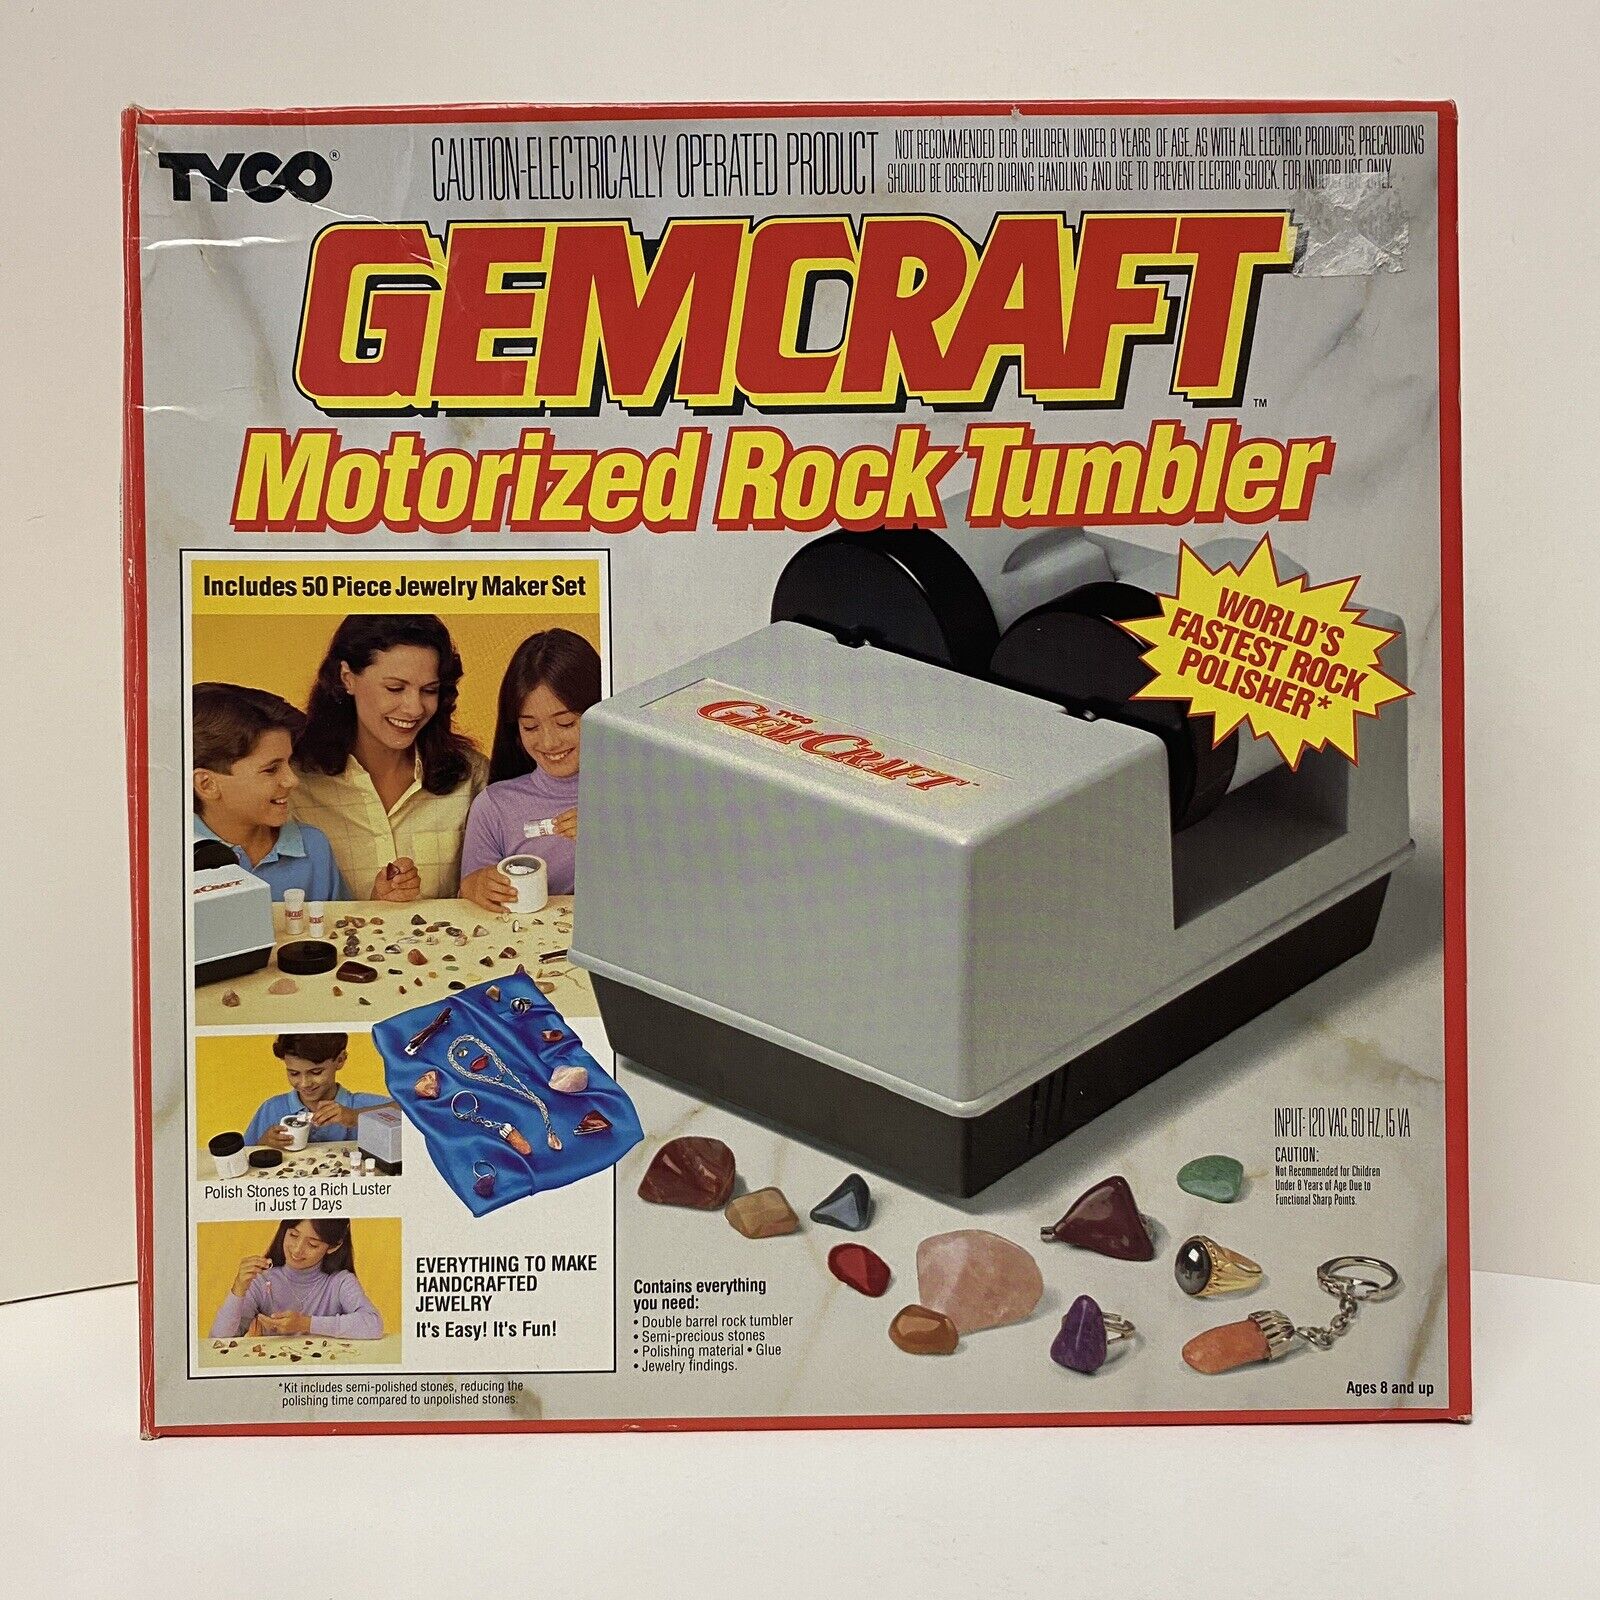 Vintage 1991 TYCO Gemcraft Electric Double Barrel Rock Tumbler, Tested # 7406